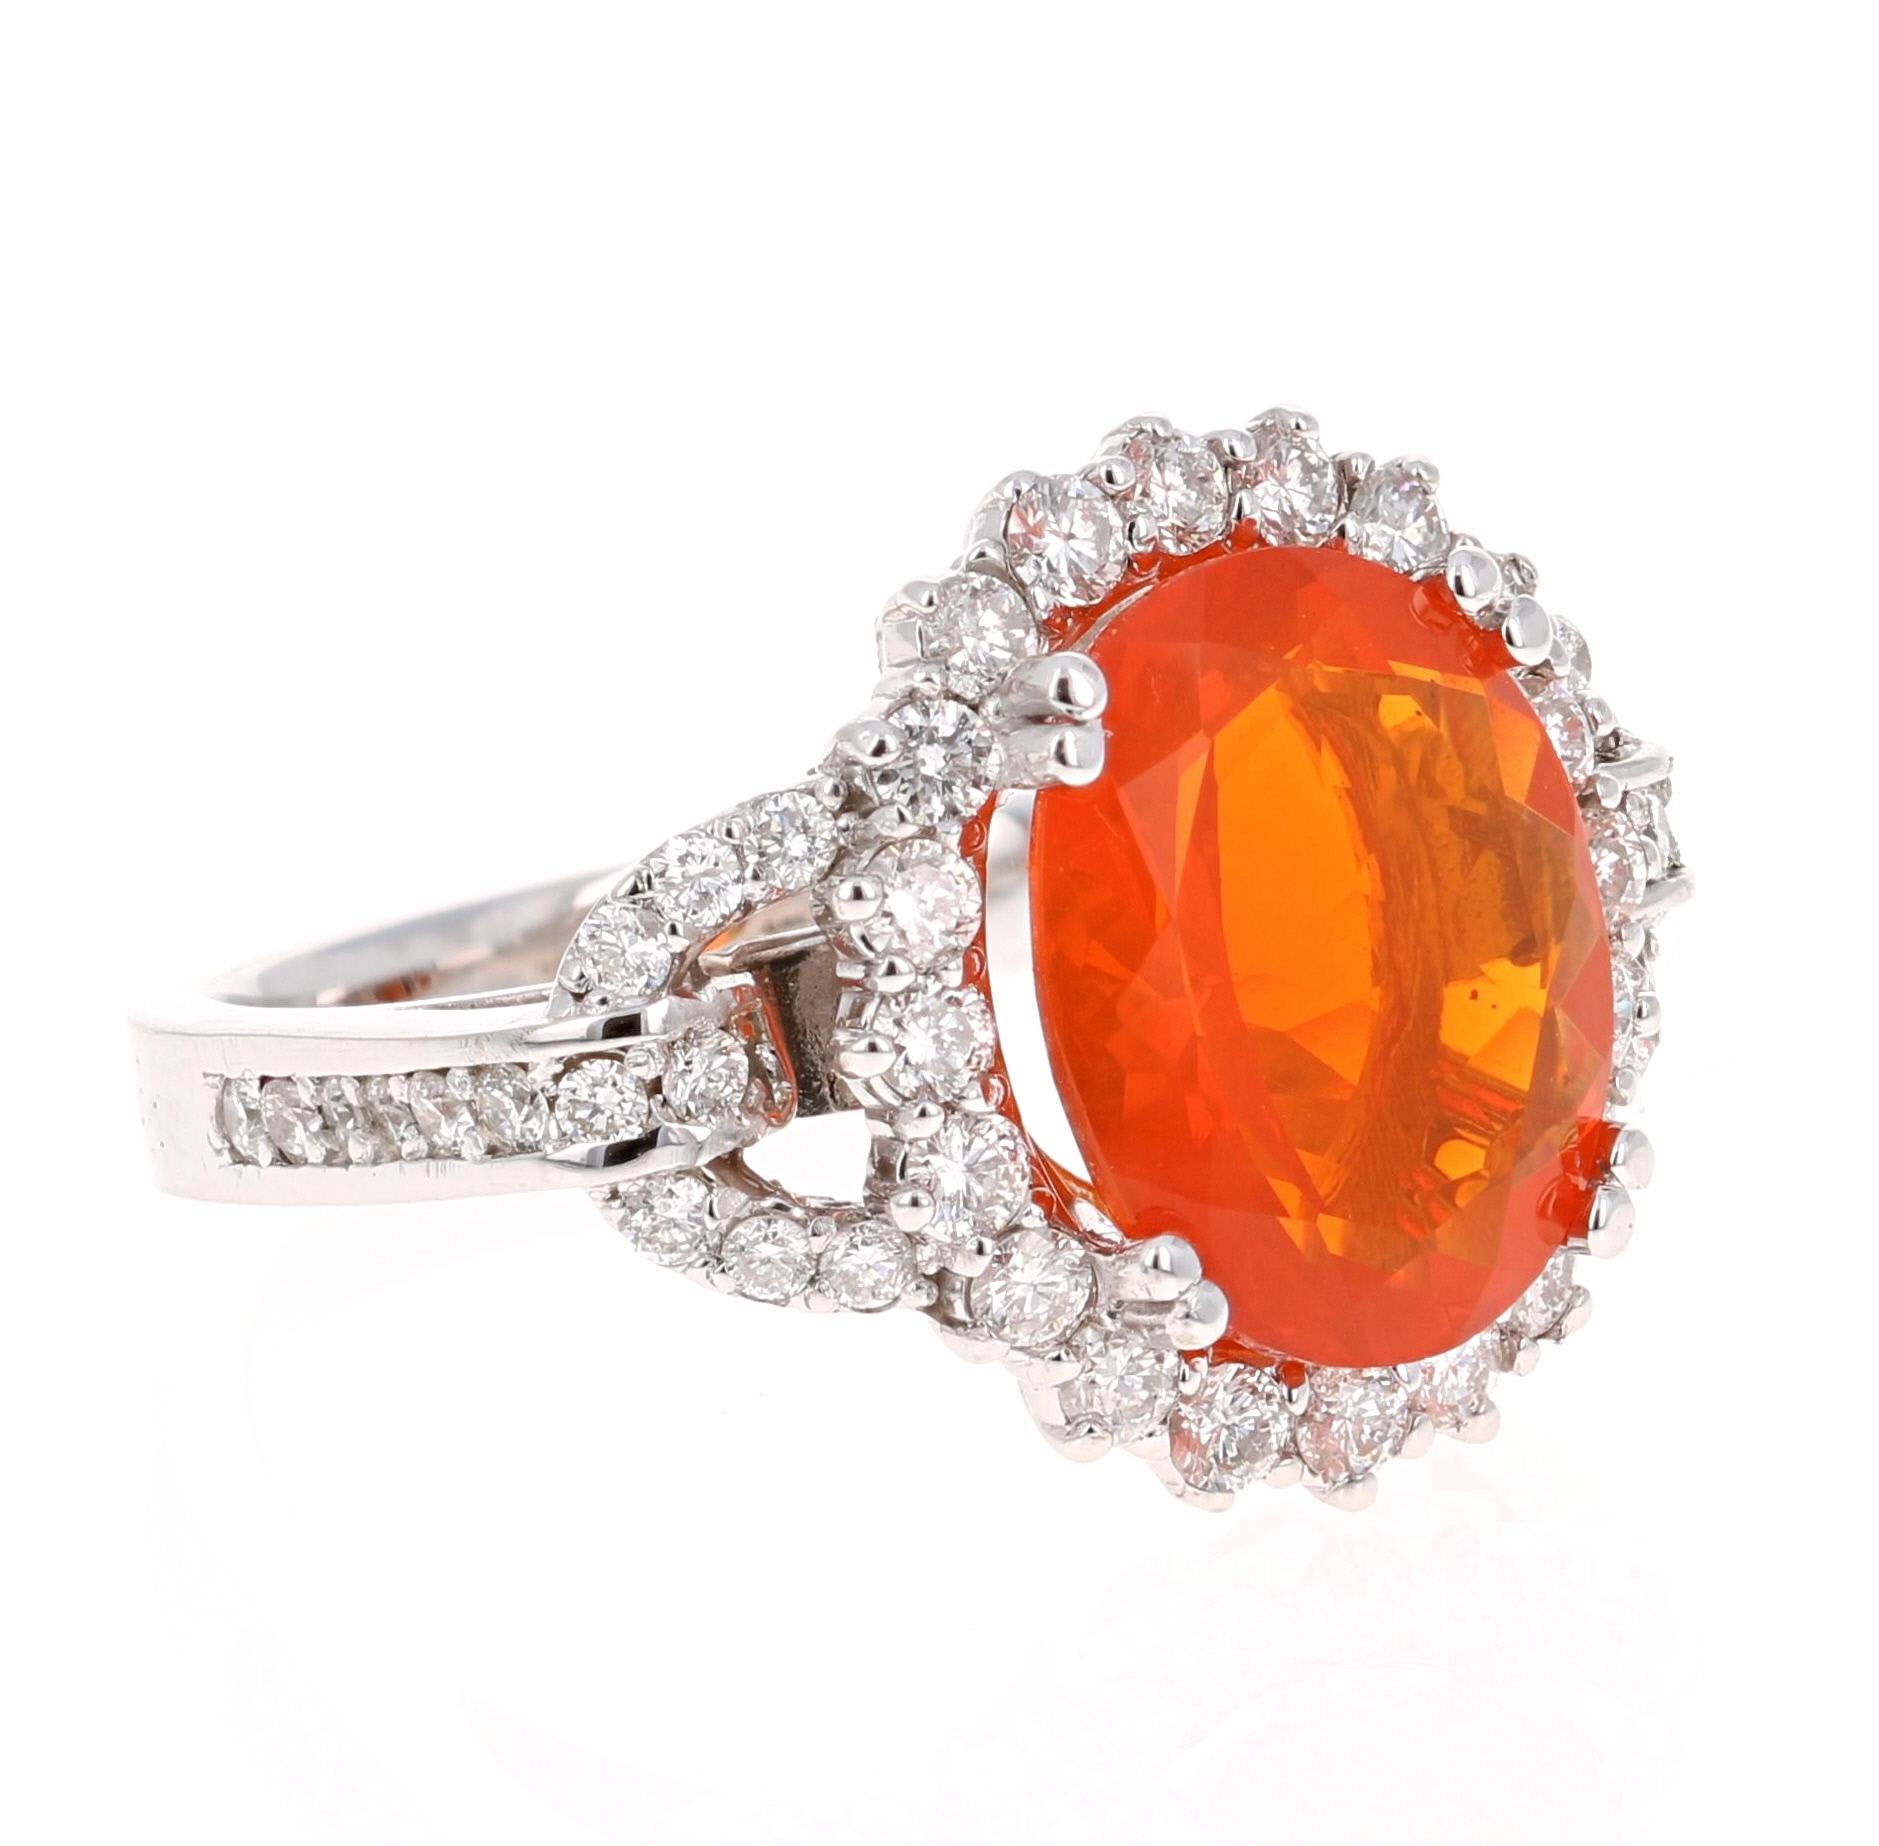 
The Orange Oval Cut Fire Opal weighs 3.05 Carats and has 48 Round Cut Diamonds that weigh 0.96 Carats. The clarity and color of the diamonds are SI-F. The total carat weight of the ring is 4.01 Carats. 

It is curated in 14K White Gold and is